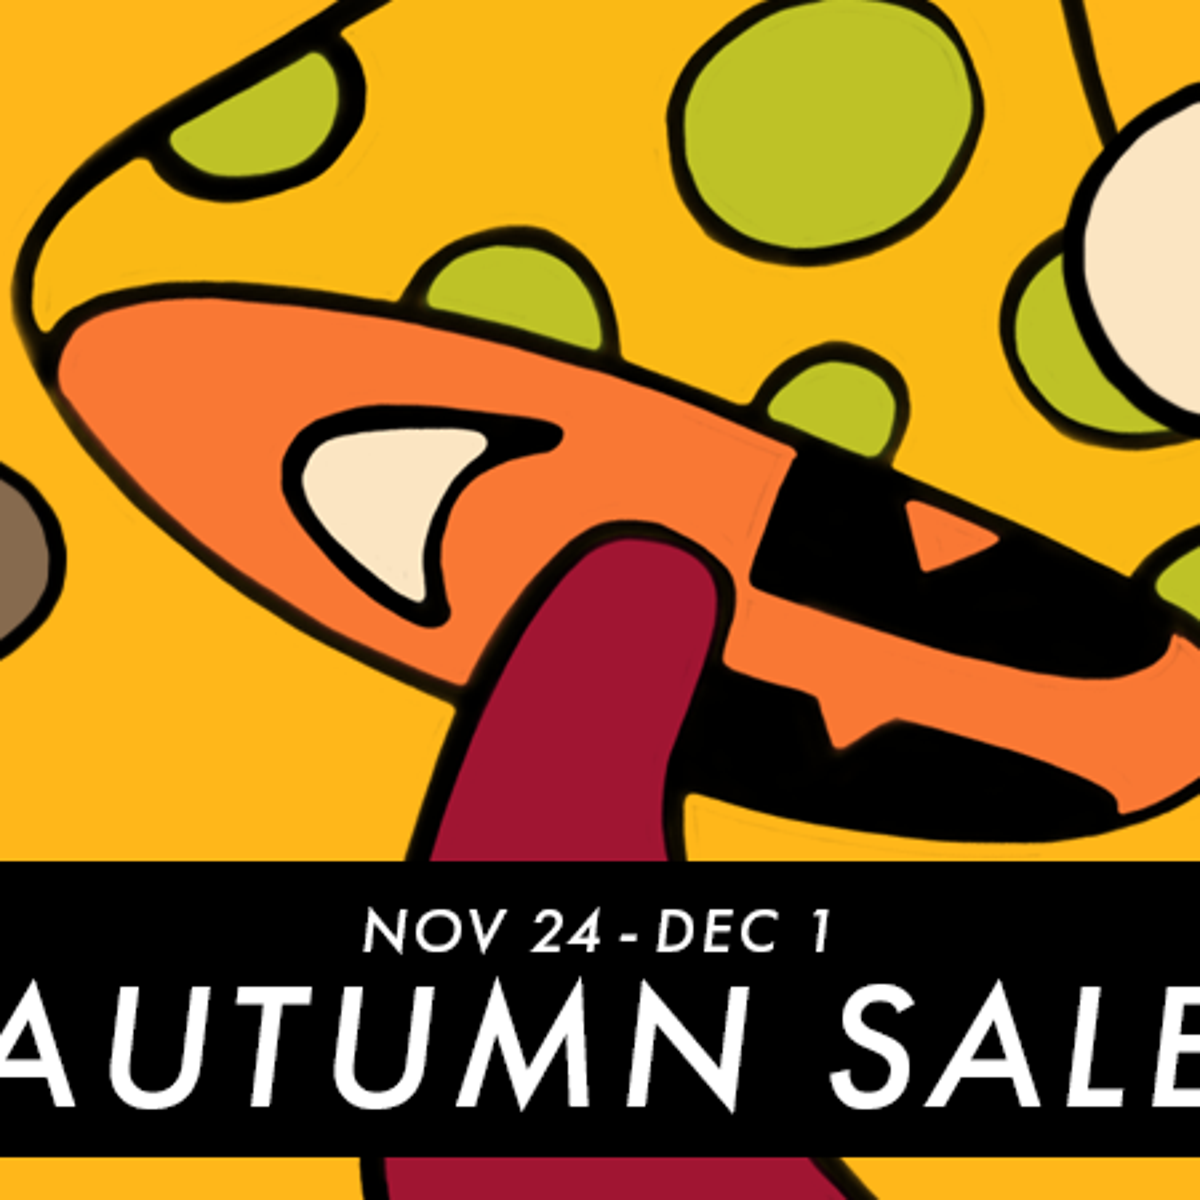 Steam Autumn Sale: Best Deals for PC Including Cyberpunk 2077, Red Dead  Redemption 2, FIFA 22, More